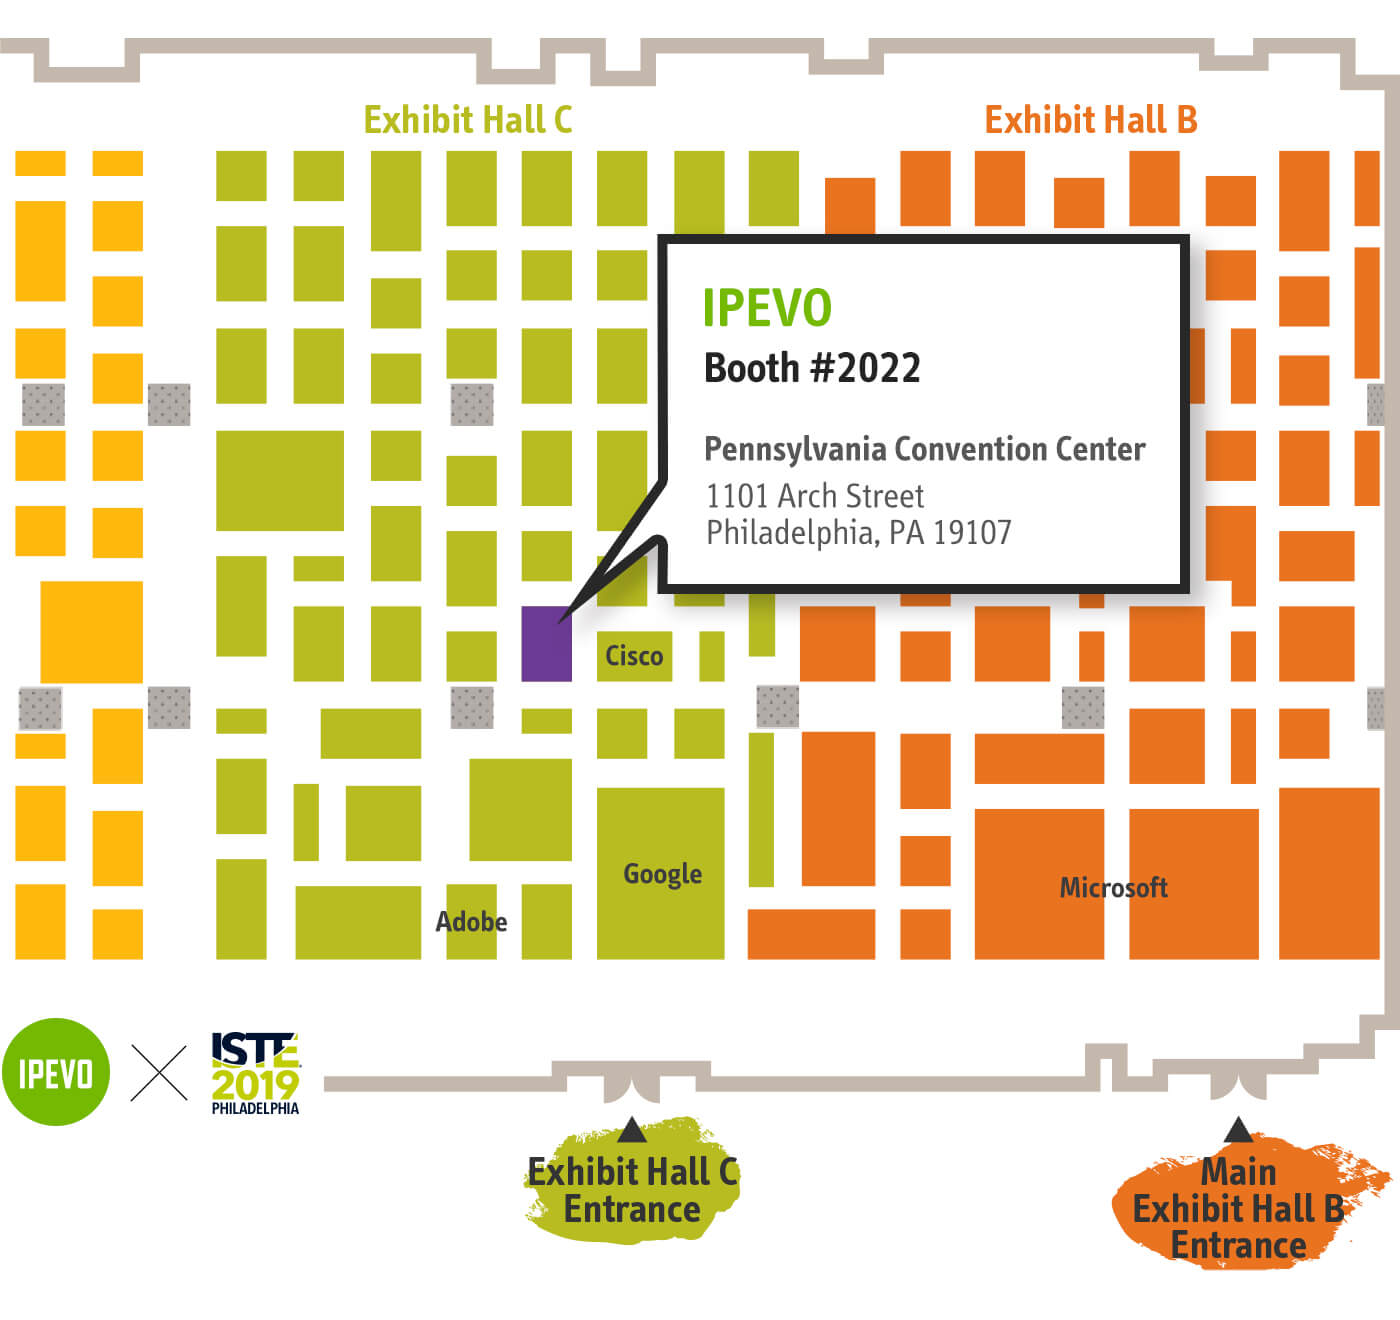 Come see us at ISTE 2019 from June 24-26. Join us at booth 2022 at the Pennsylvania Convention Center, Philadelphia, PA.